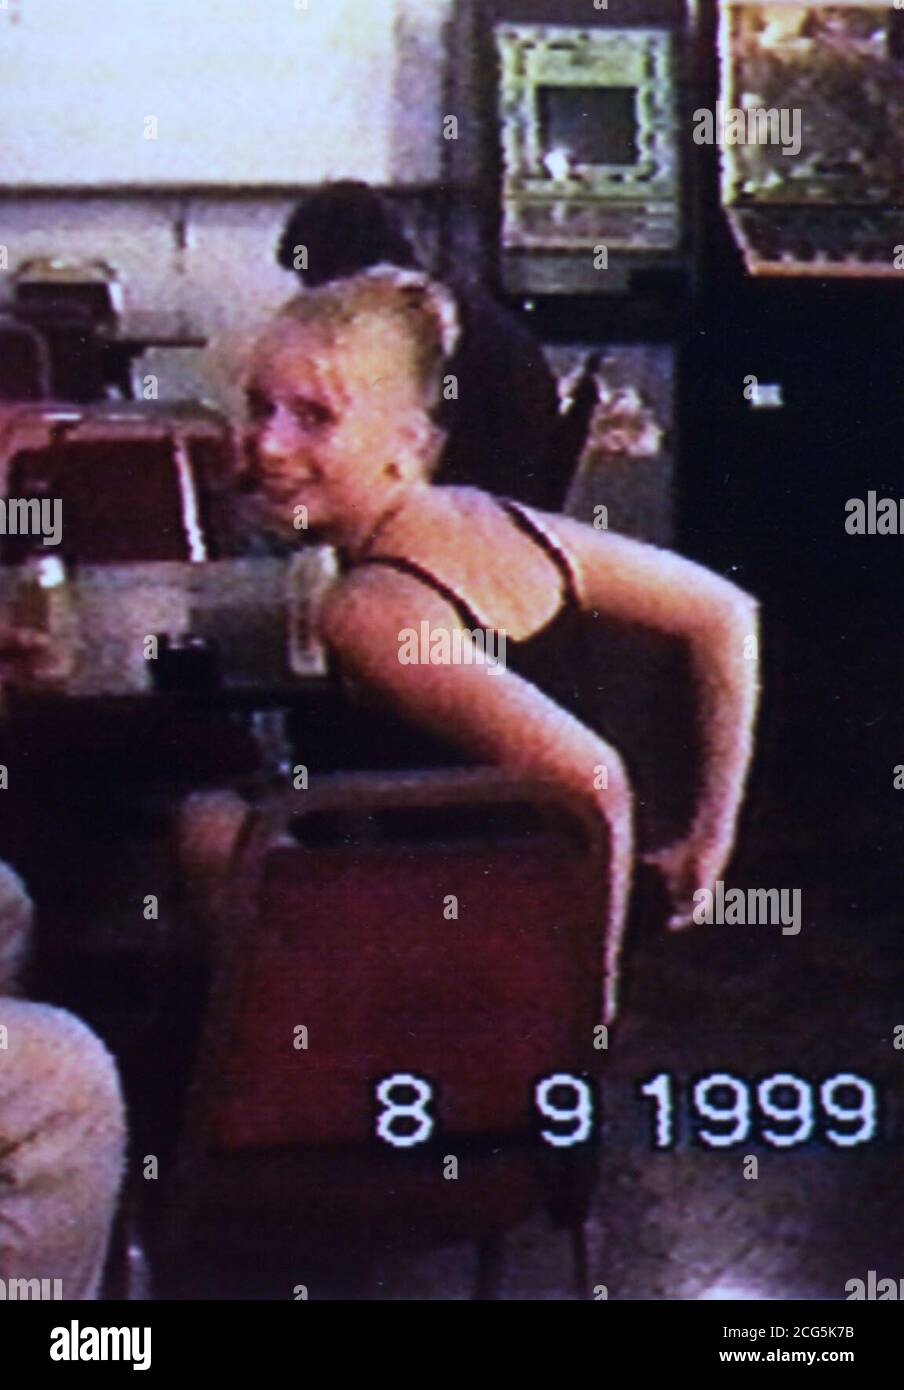 Video still picture of murder victim Vicky Hall, taken at the Bandbox nightclub in Felixstowe, two weeks before her disappearance. Detectives investigating the case hope that publication of footage will lead to the identification of Vicky's killer. Stock Photo